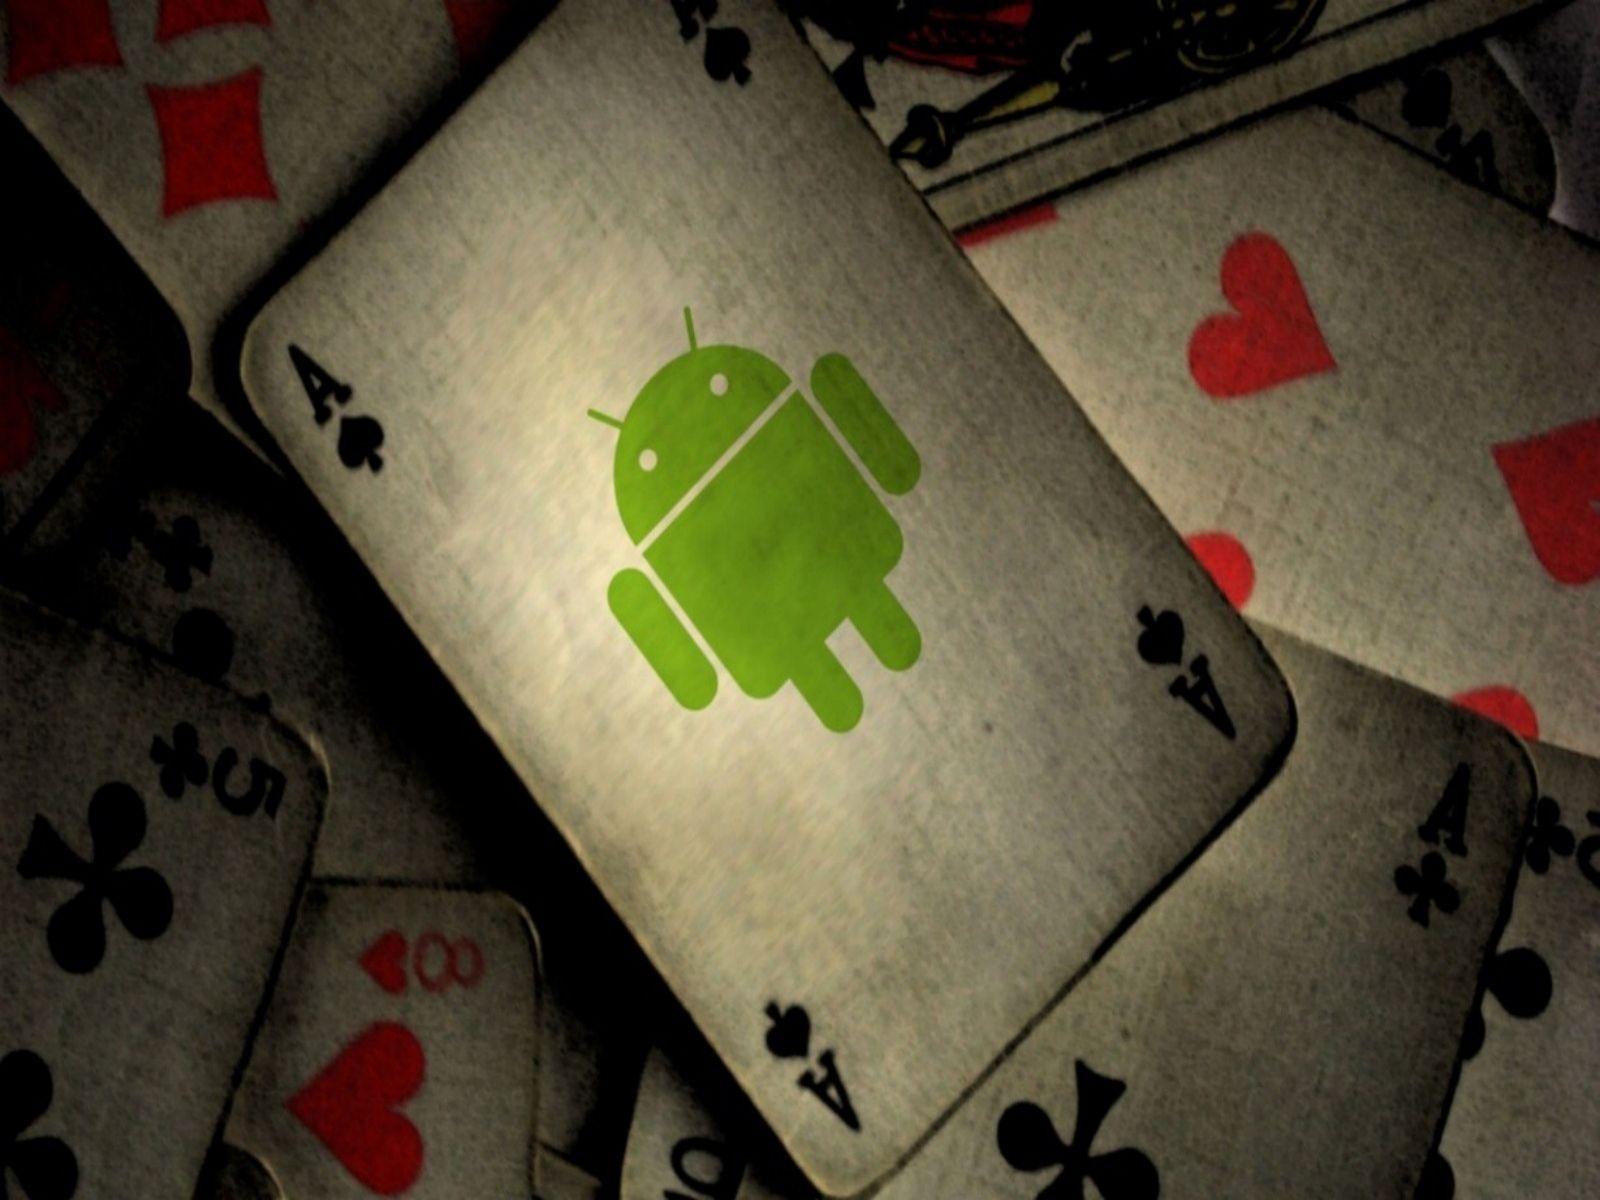 Android Studio Wallpapers - Top Free Android Studio Backgrounds